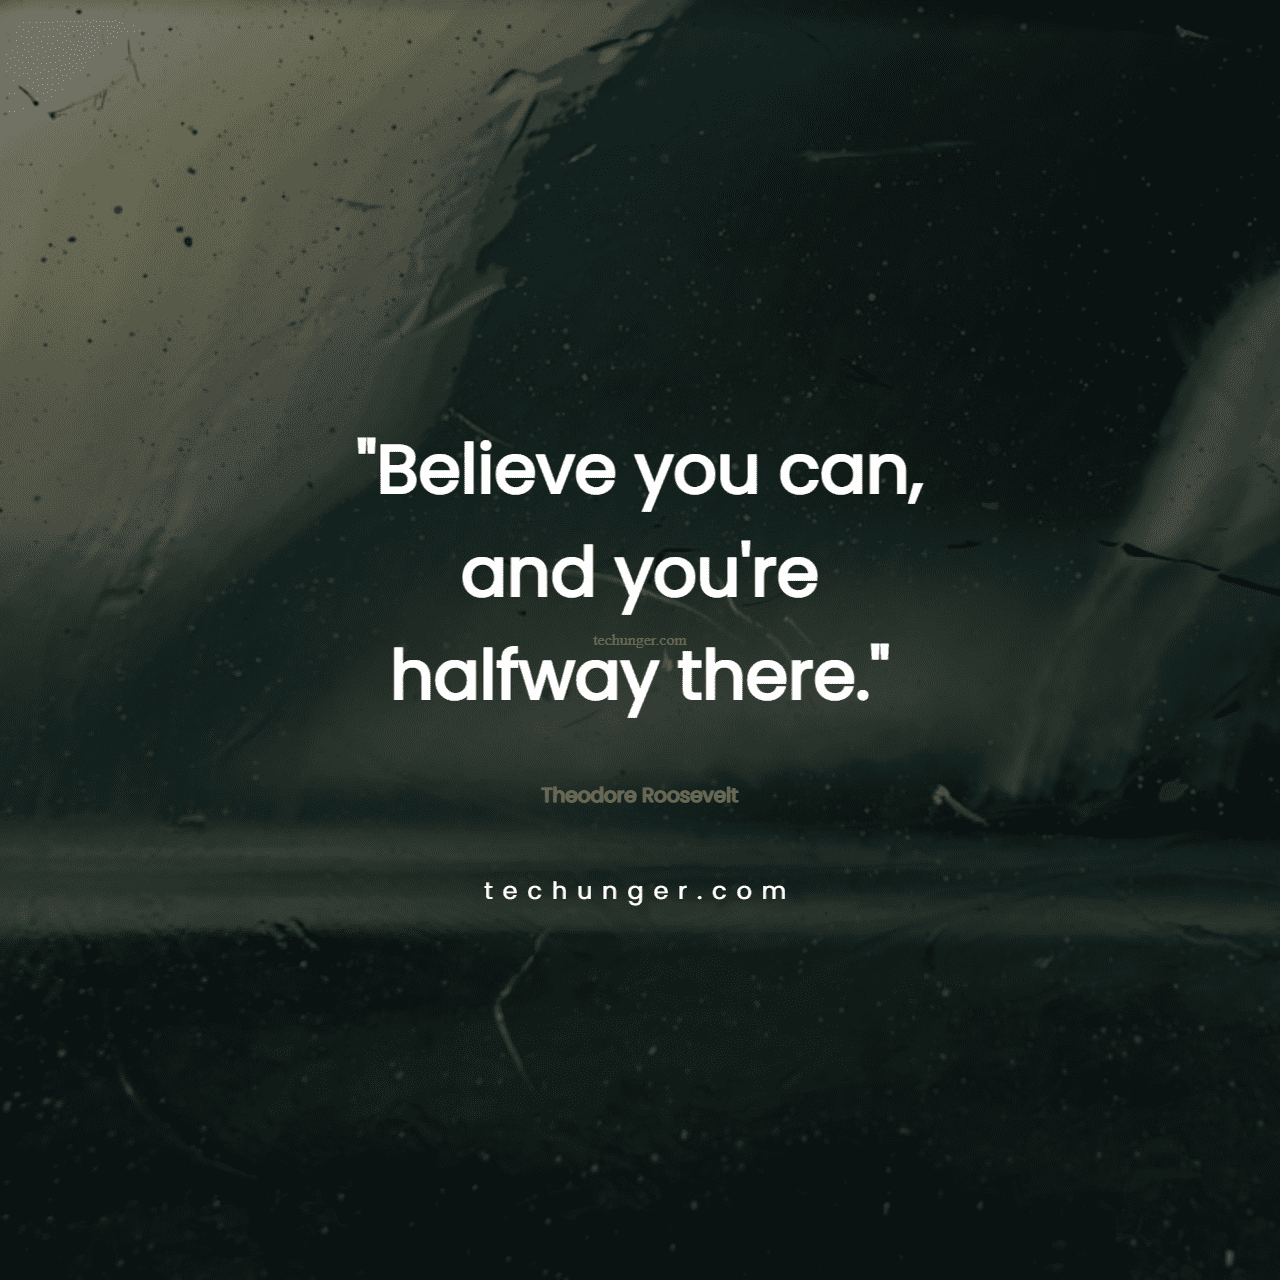 motivational,inspirational,quotes,Believe you can, and you're halfway there.
Theodore Roosevelt